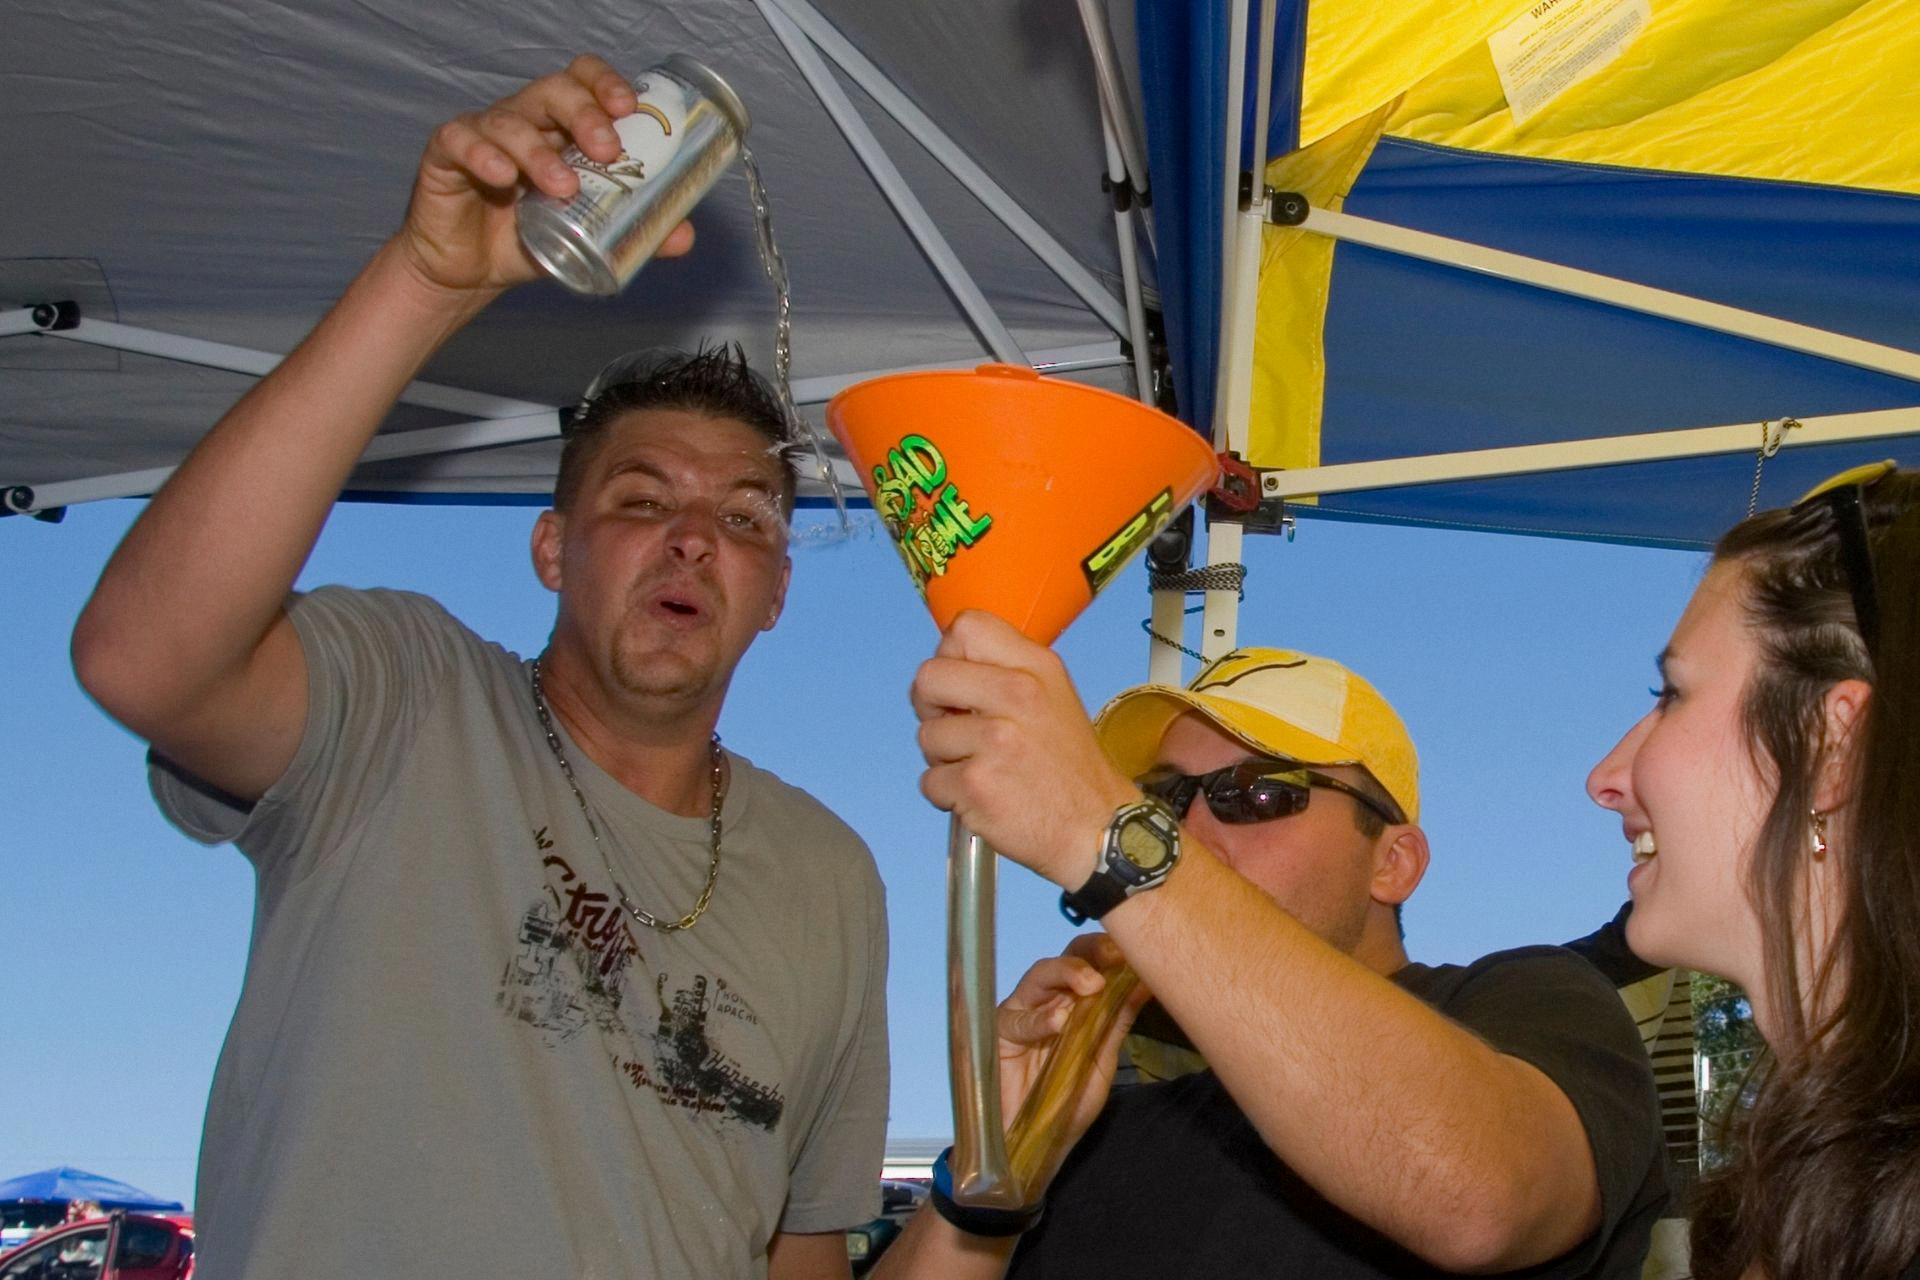 funneling a beer